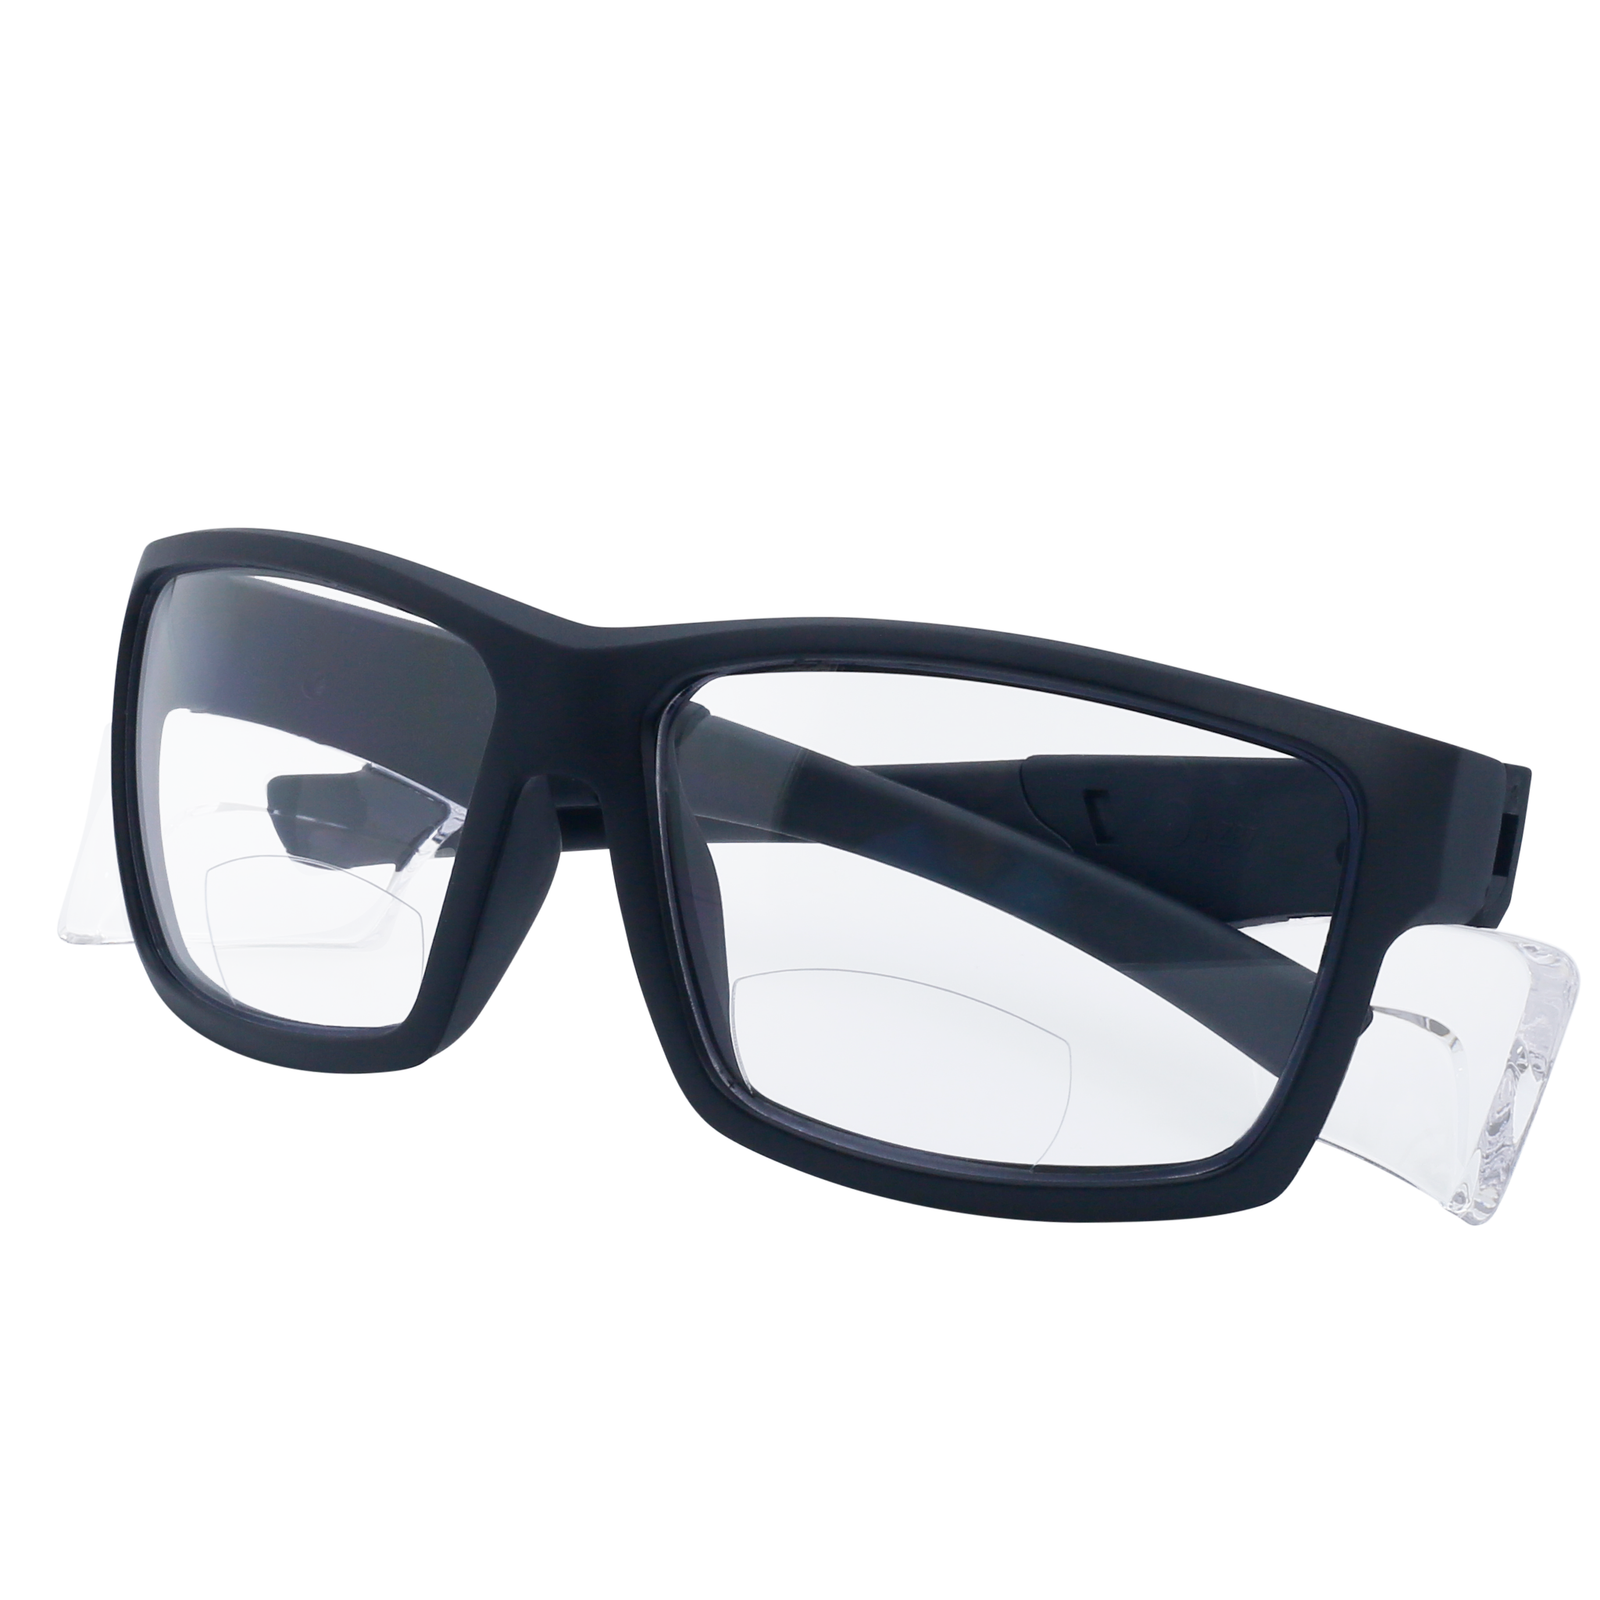 Diagonal view of a JORESTECH bifocal safety reader glass with side shield for high impact protection with the temples folded.. These safety glasses have black frame and clear polycarbonate lenses over white background